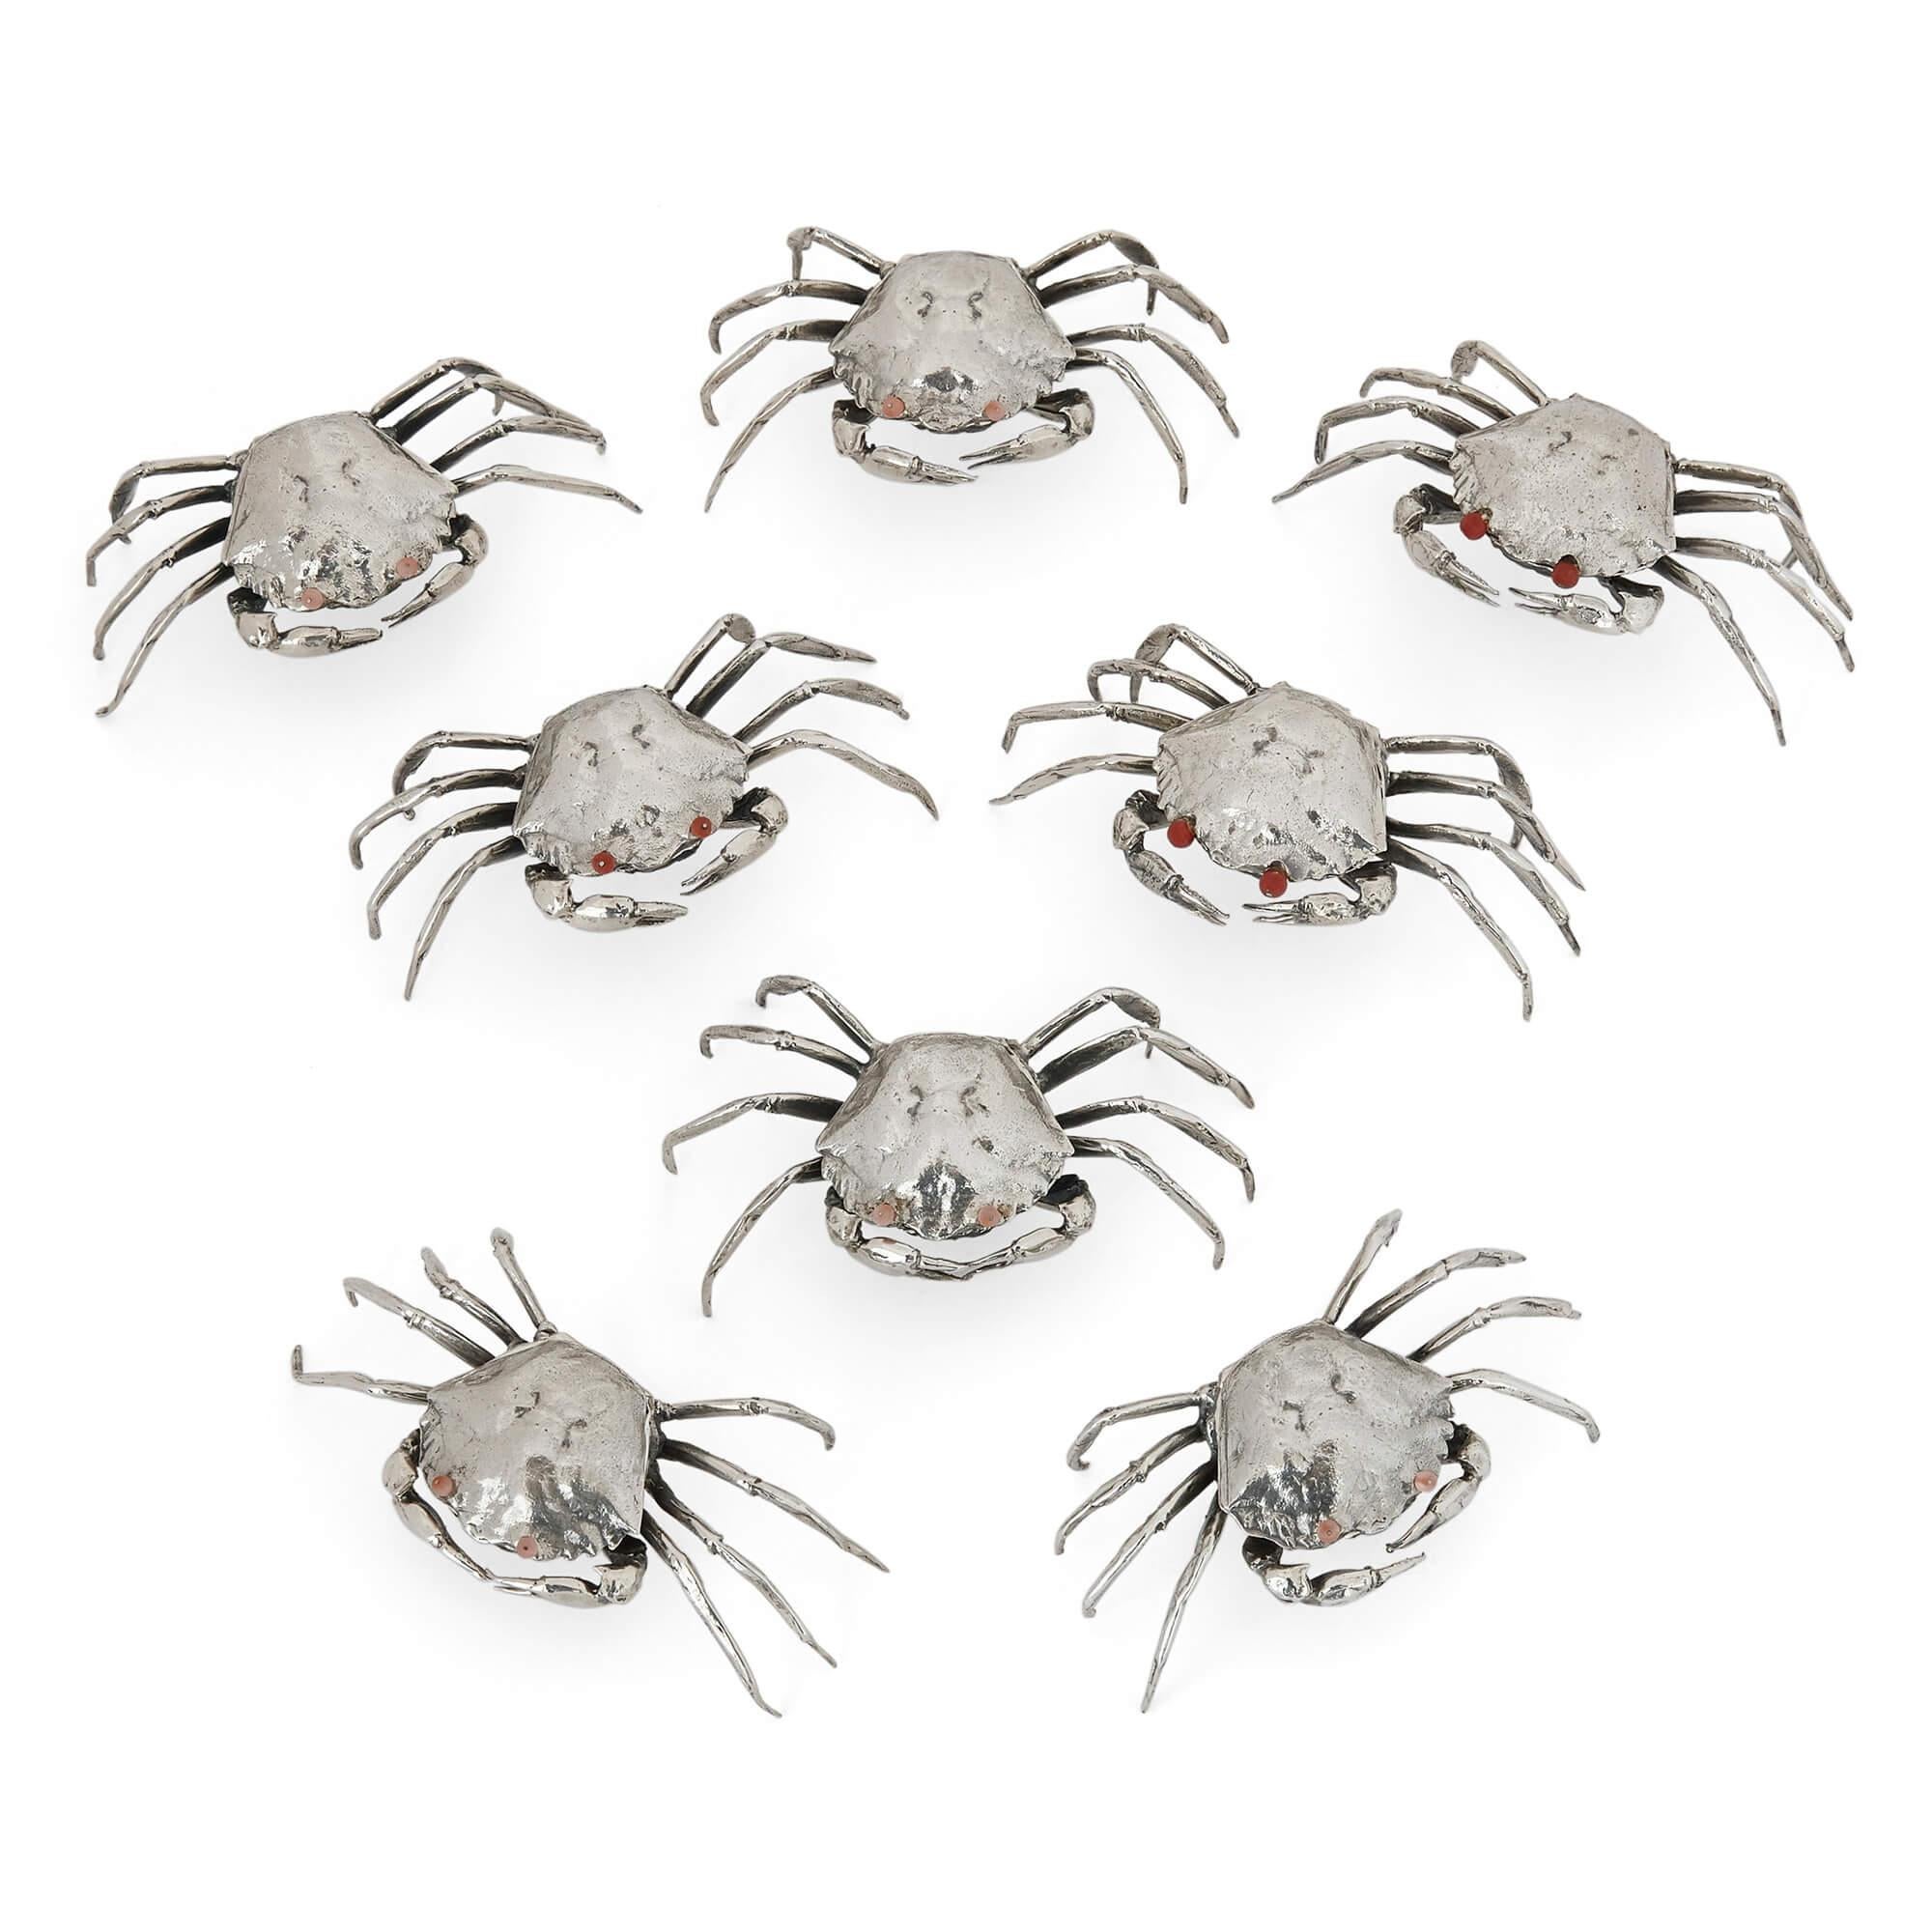 These charming silver boxes, which could have been made as salt and pepper or pill pots, are each crafted to resemble a small crab. Crafted with great precision and superbly realistic, they make for a highly desirable set of collectibles. They all